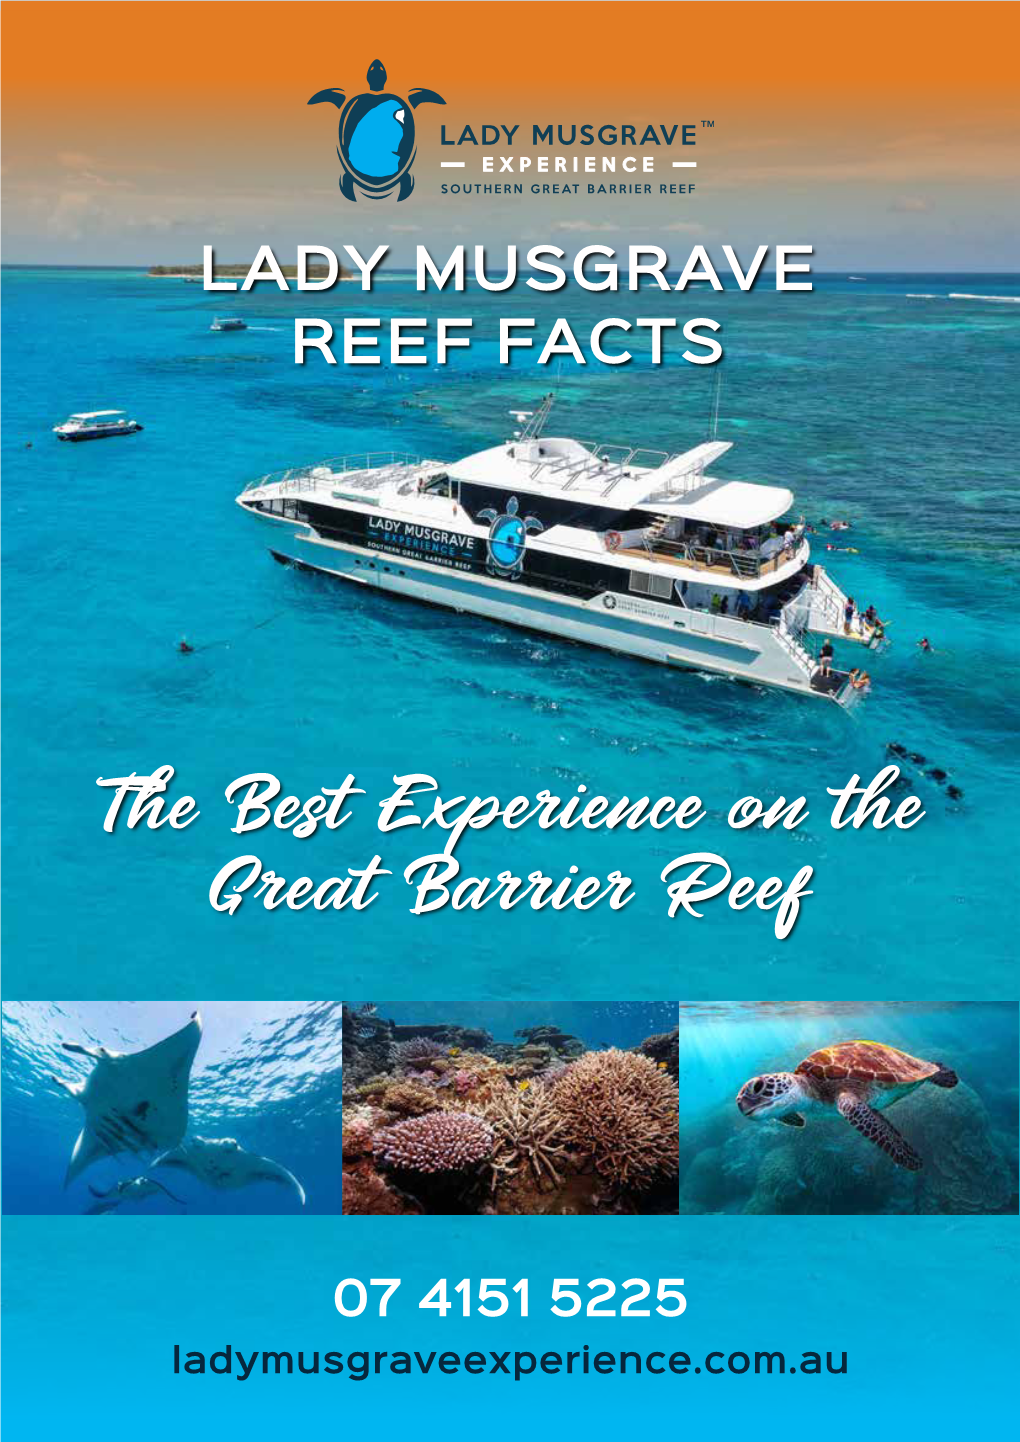 The Best Experience on the Great Barrier Reef